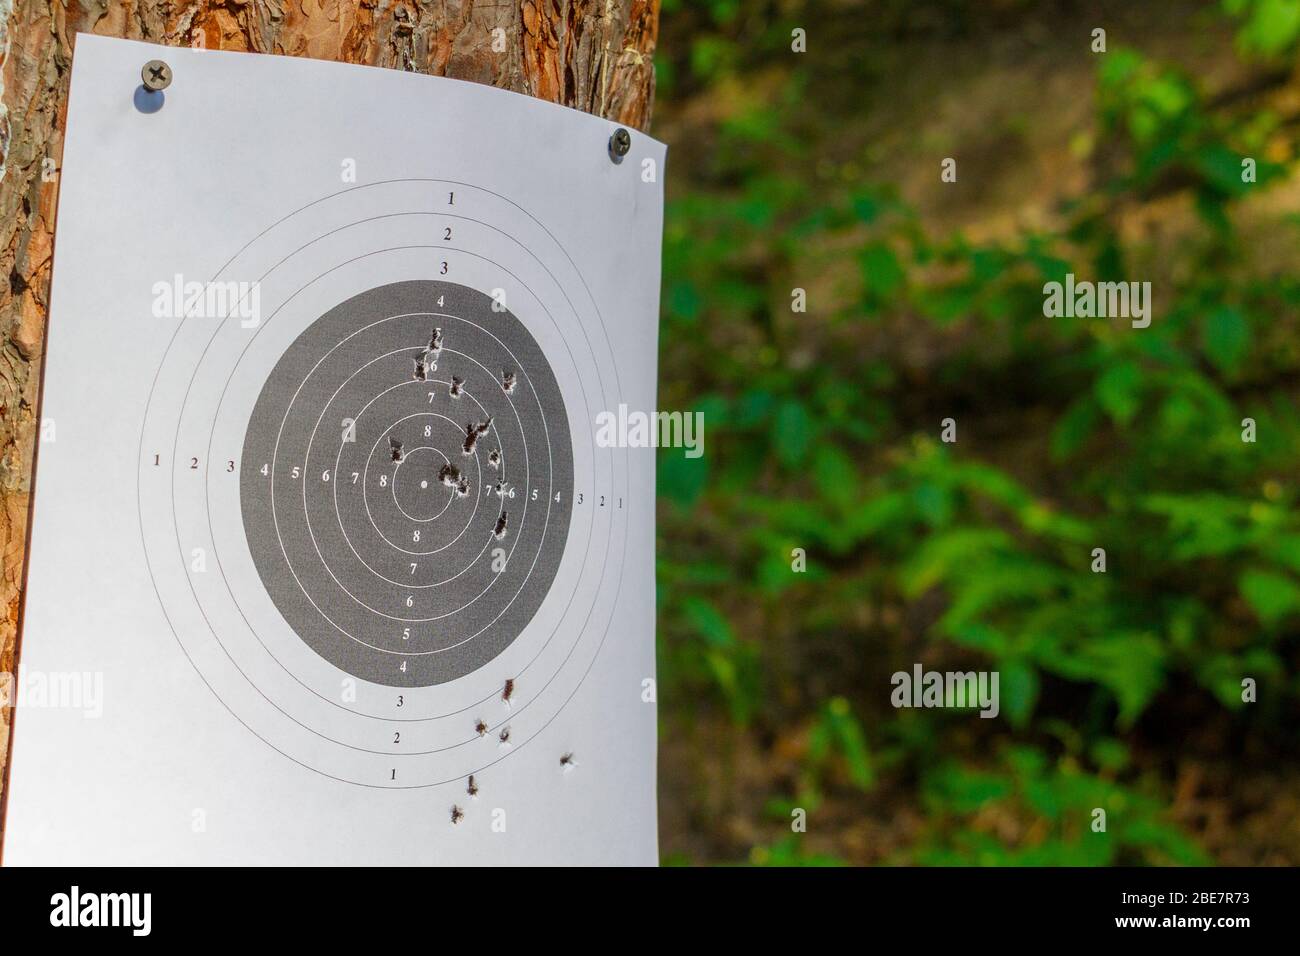 Target in the dash. Shooting from a gun. Targets with bullet holes in the dash. Stock Photo